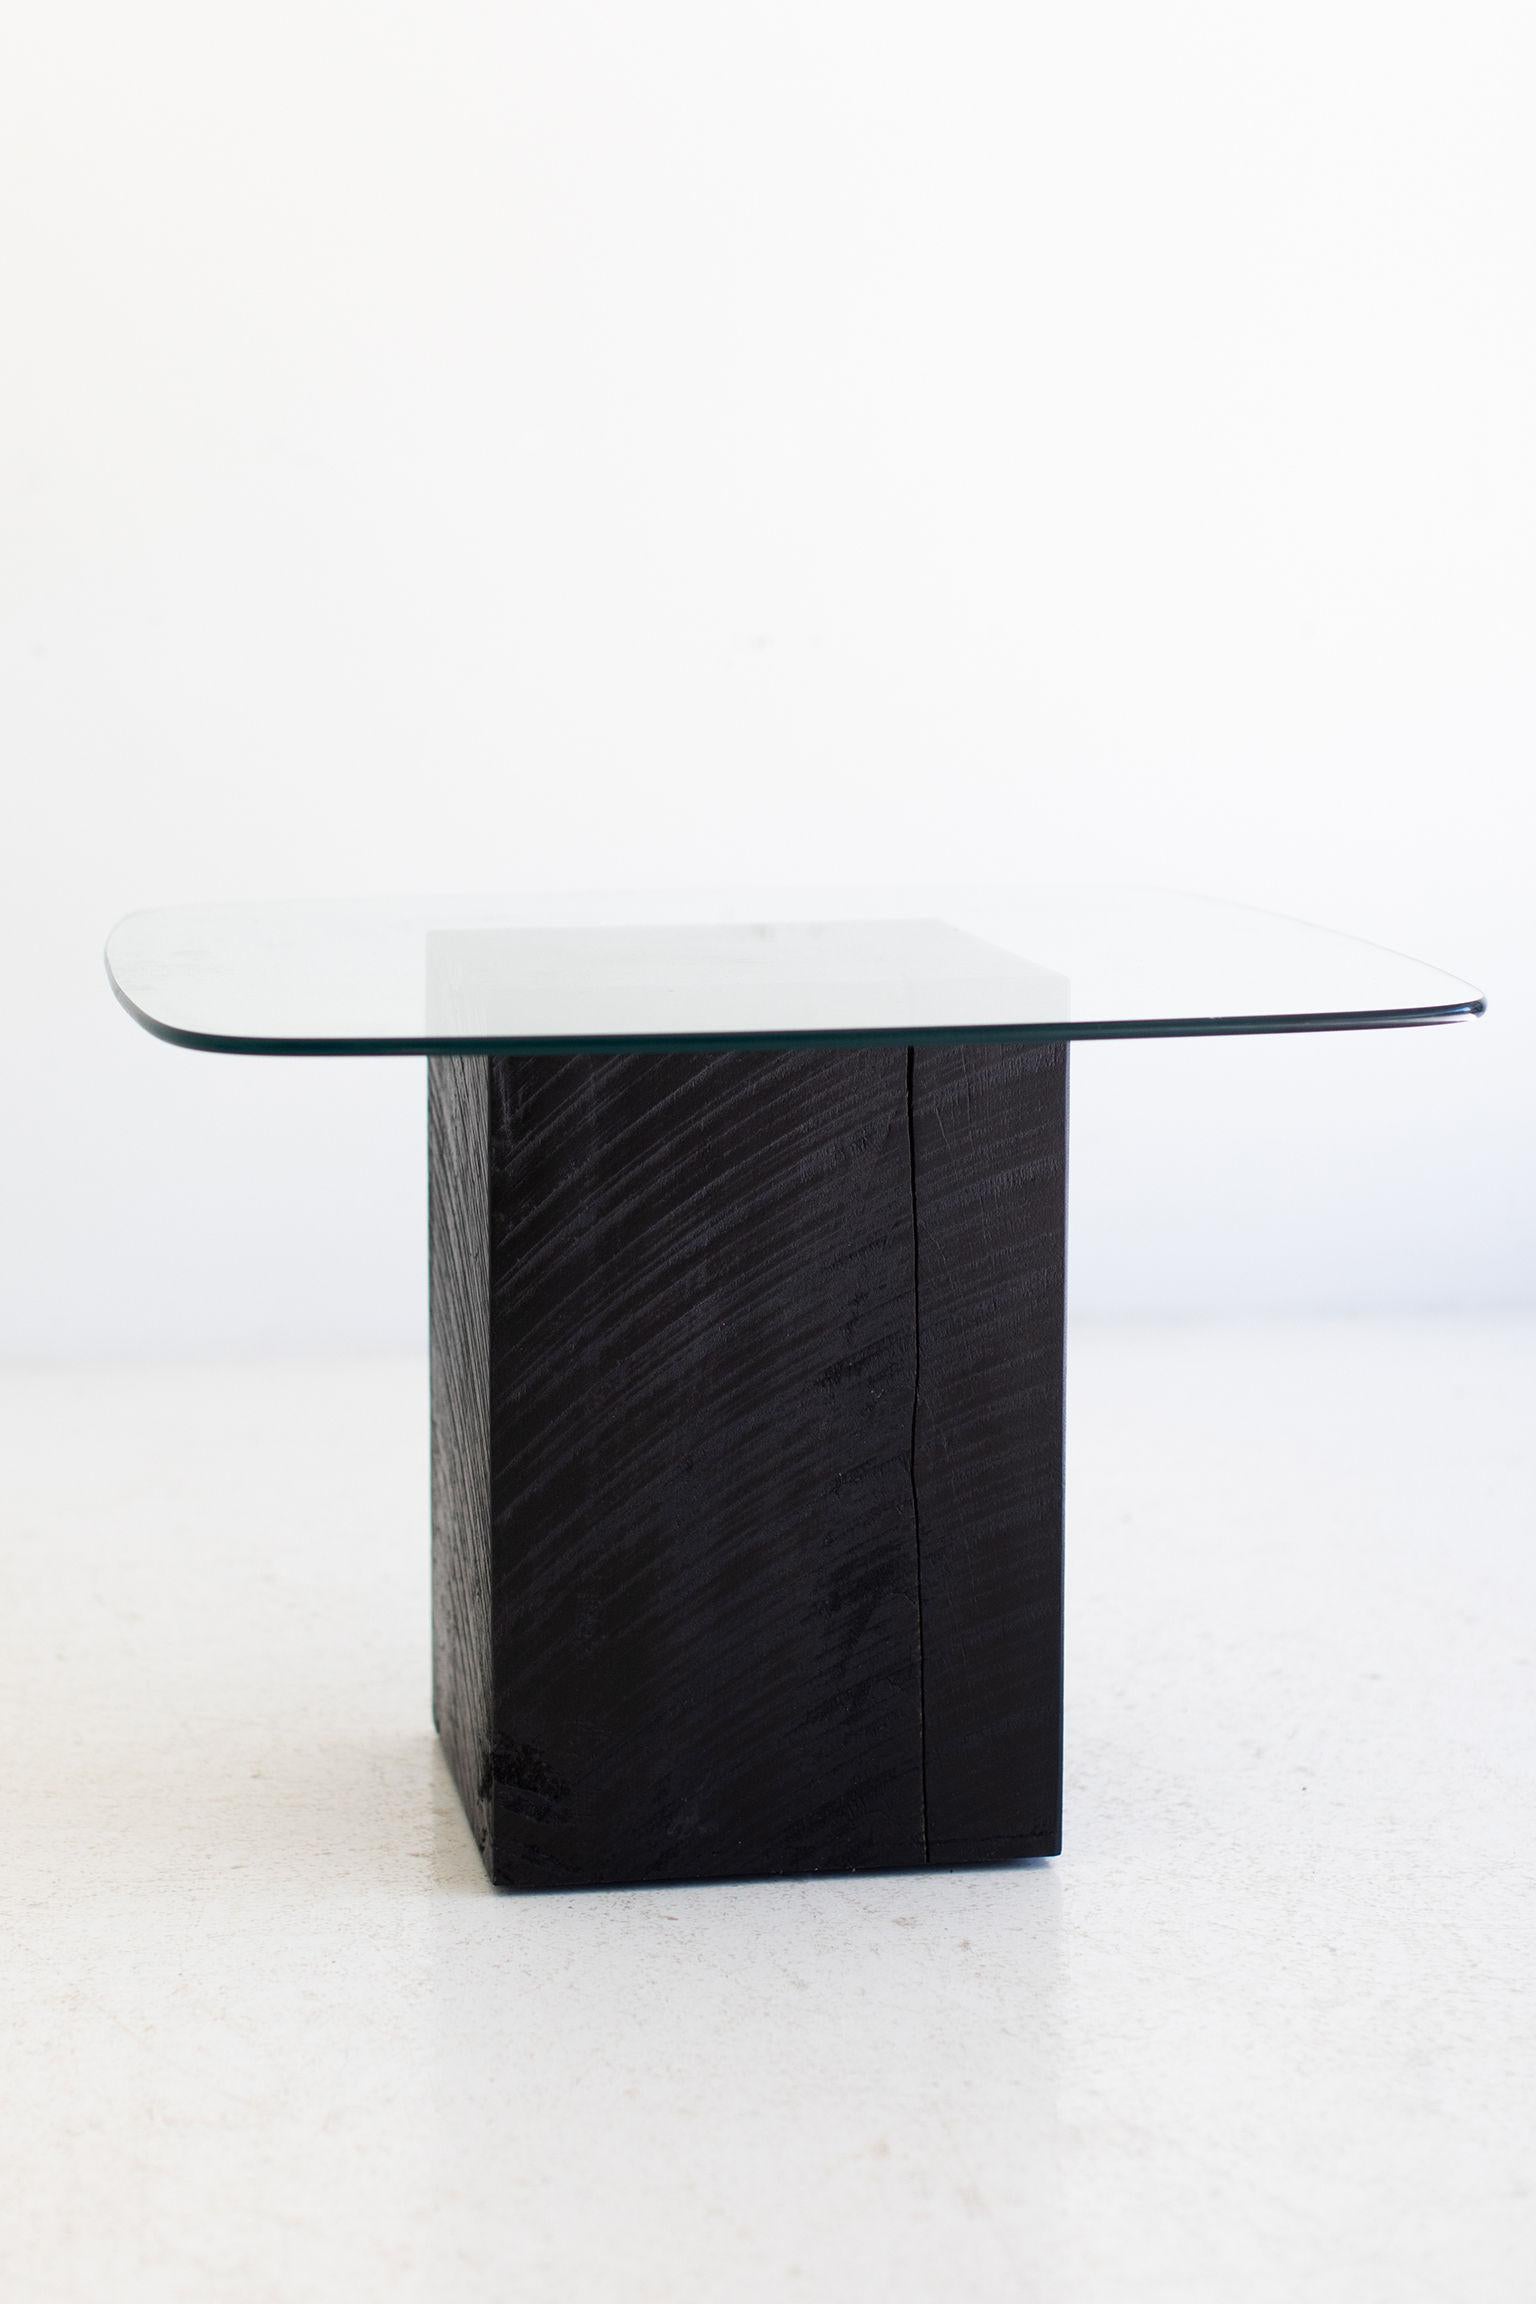 These are handmade from our family to yours! See how we do it here.

Our stumps are now kiln dried! This process helps with major cracking, moisture issues, and bugs!

This Modern Glass Top Coffee Table is made in the heart of Ohio with locally